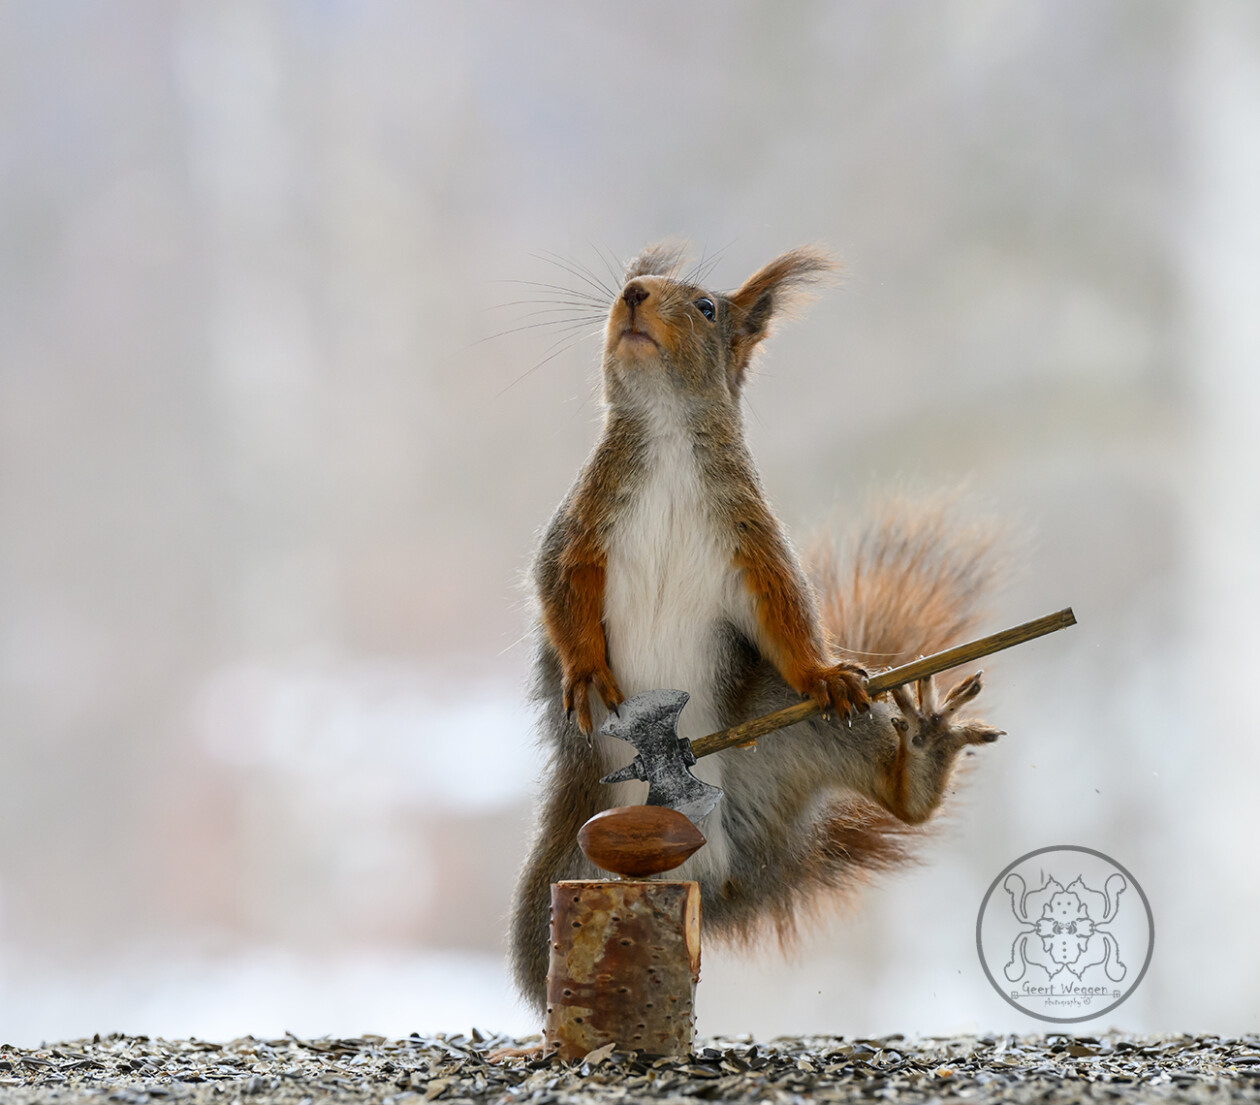 Photographer Geert Weggen Captured Lovely And Playful Pictures Of Squirrels In Action (15)